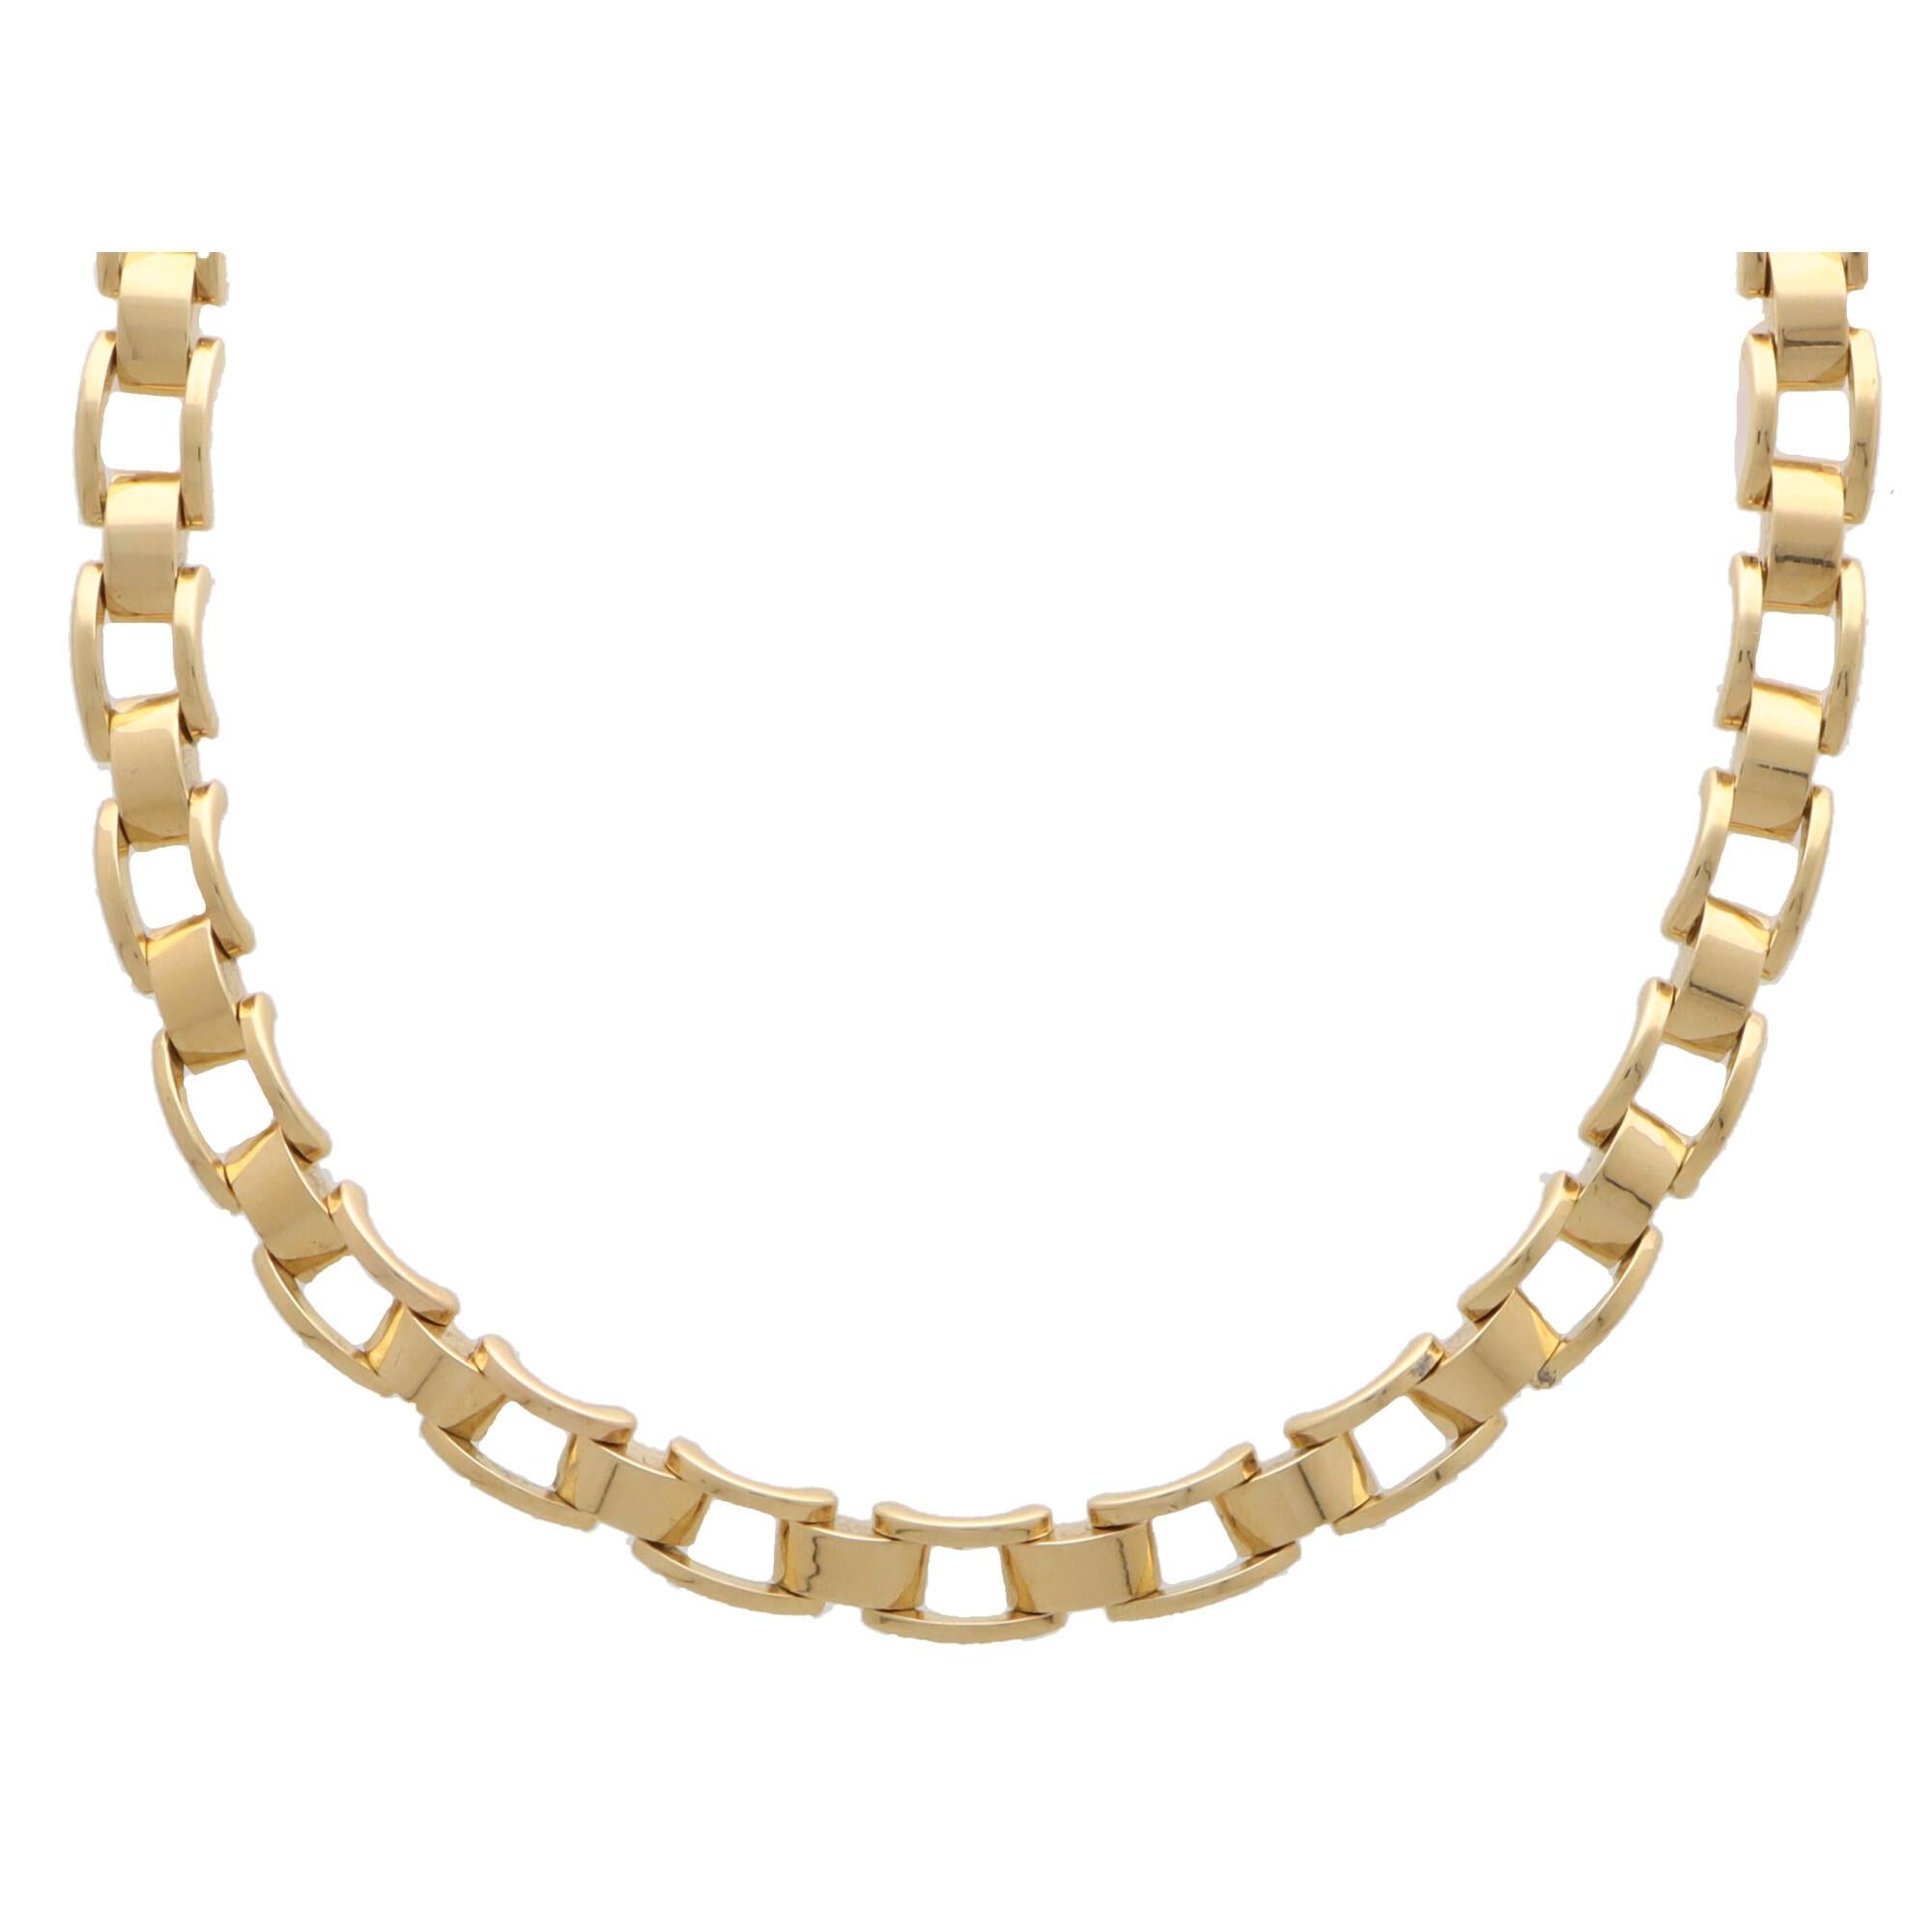 Vintage Mauboussin Chain Link Necklace Set in 18k Yellow Gold In Excellent Condition For Sale In London, GB